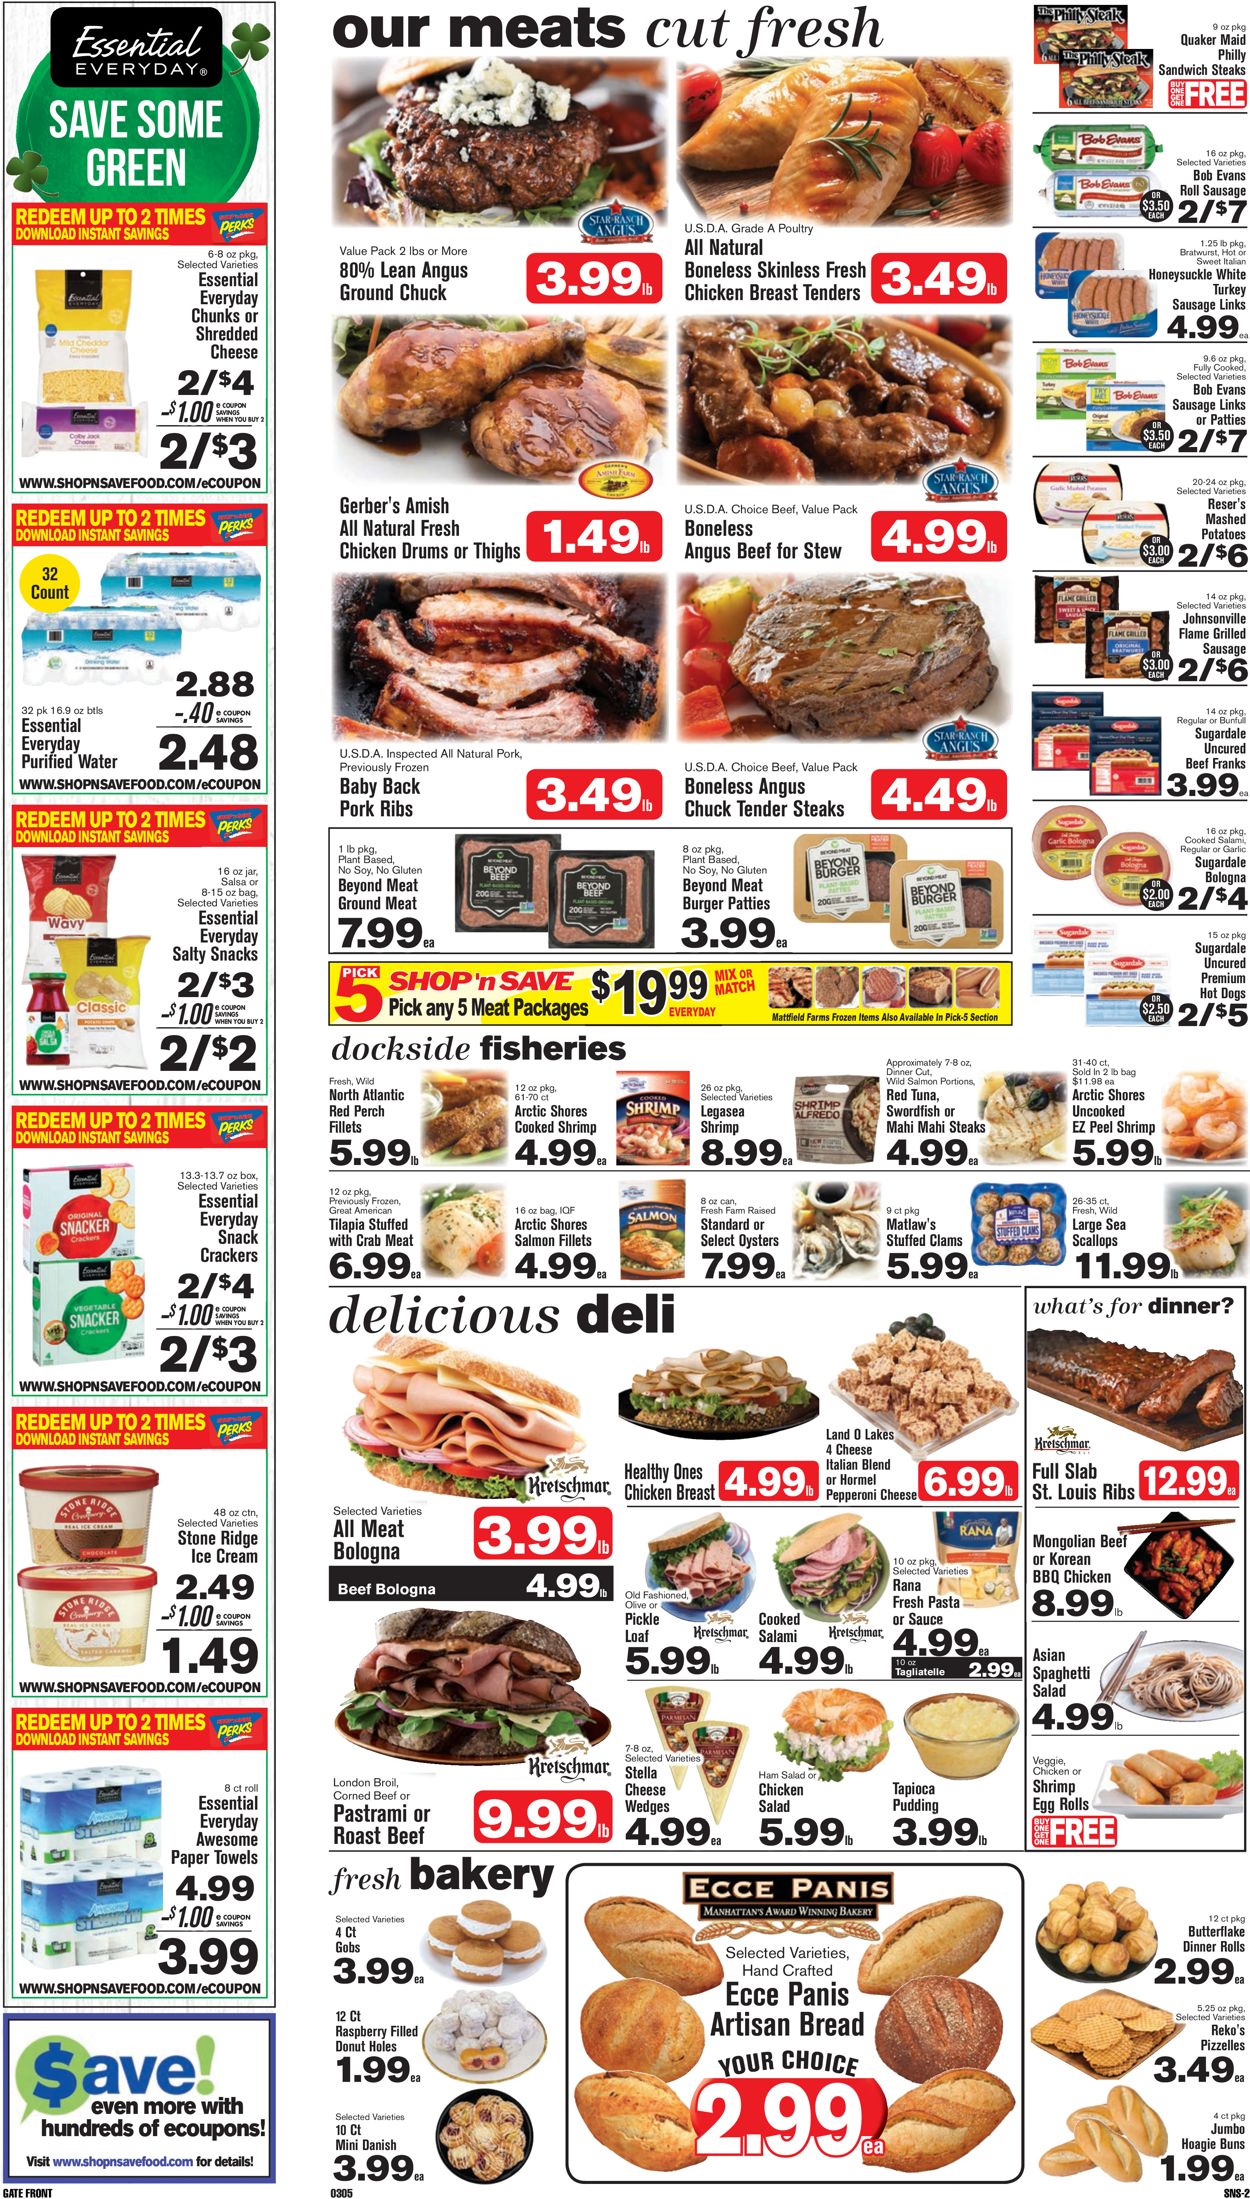 Shop ‘n Save Ad from 03/05/2020